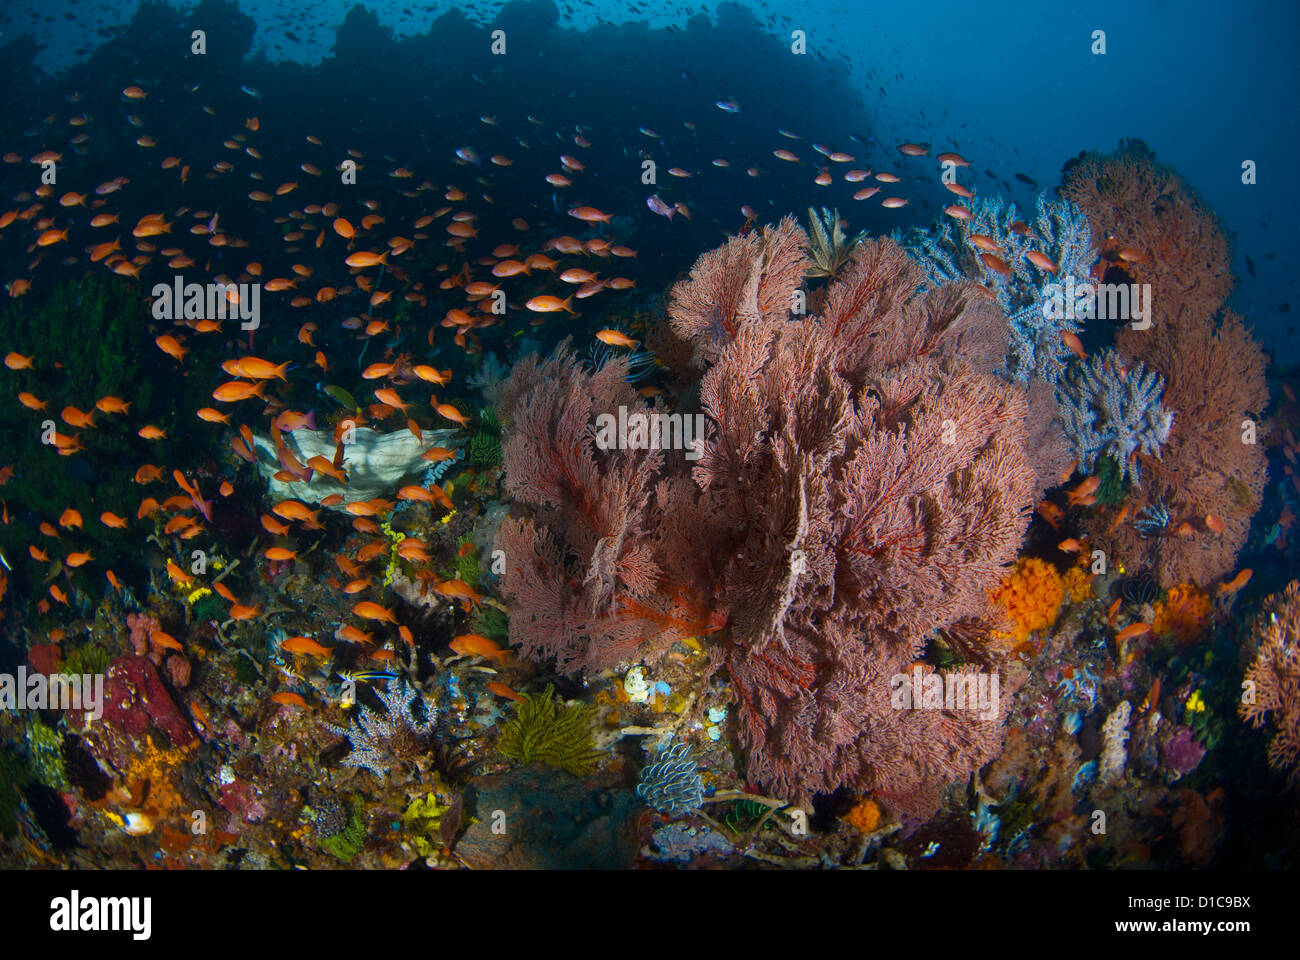 A very healthy coral reef with its coral fish. The water is very clear and nice and blue. Komodo National Park, Indonesia Stock Photo